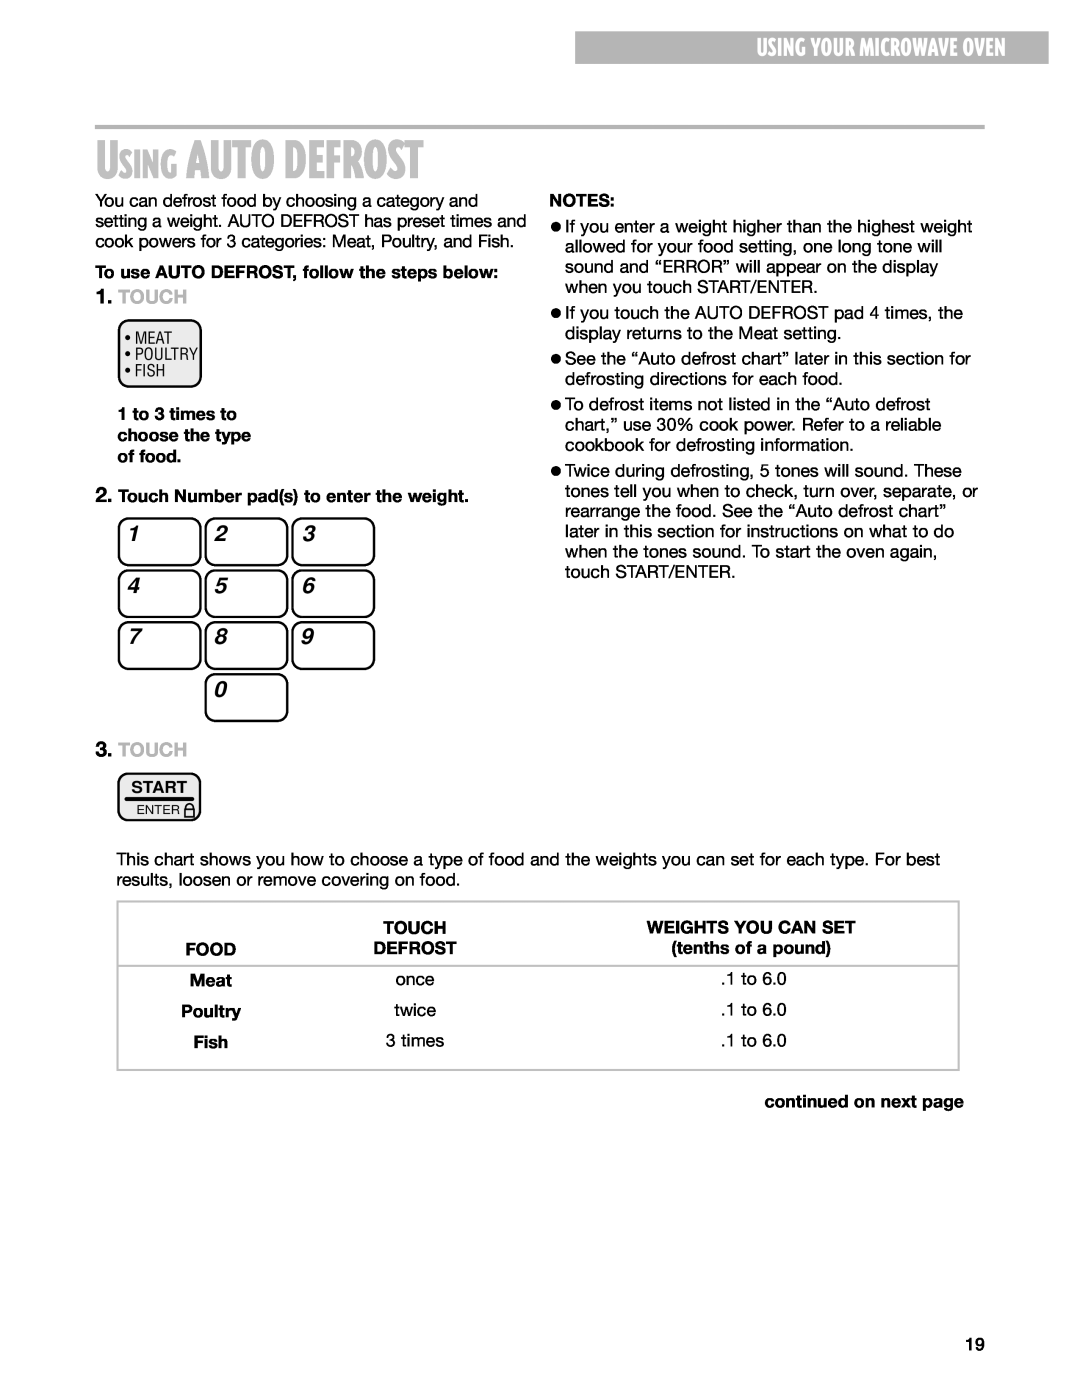 Whirlpool MT1100SH installation instructions 1 2 4, Using Your Microwave Oven, Touch, Using Auto Defrost 